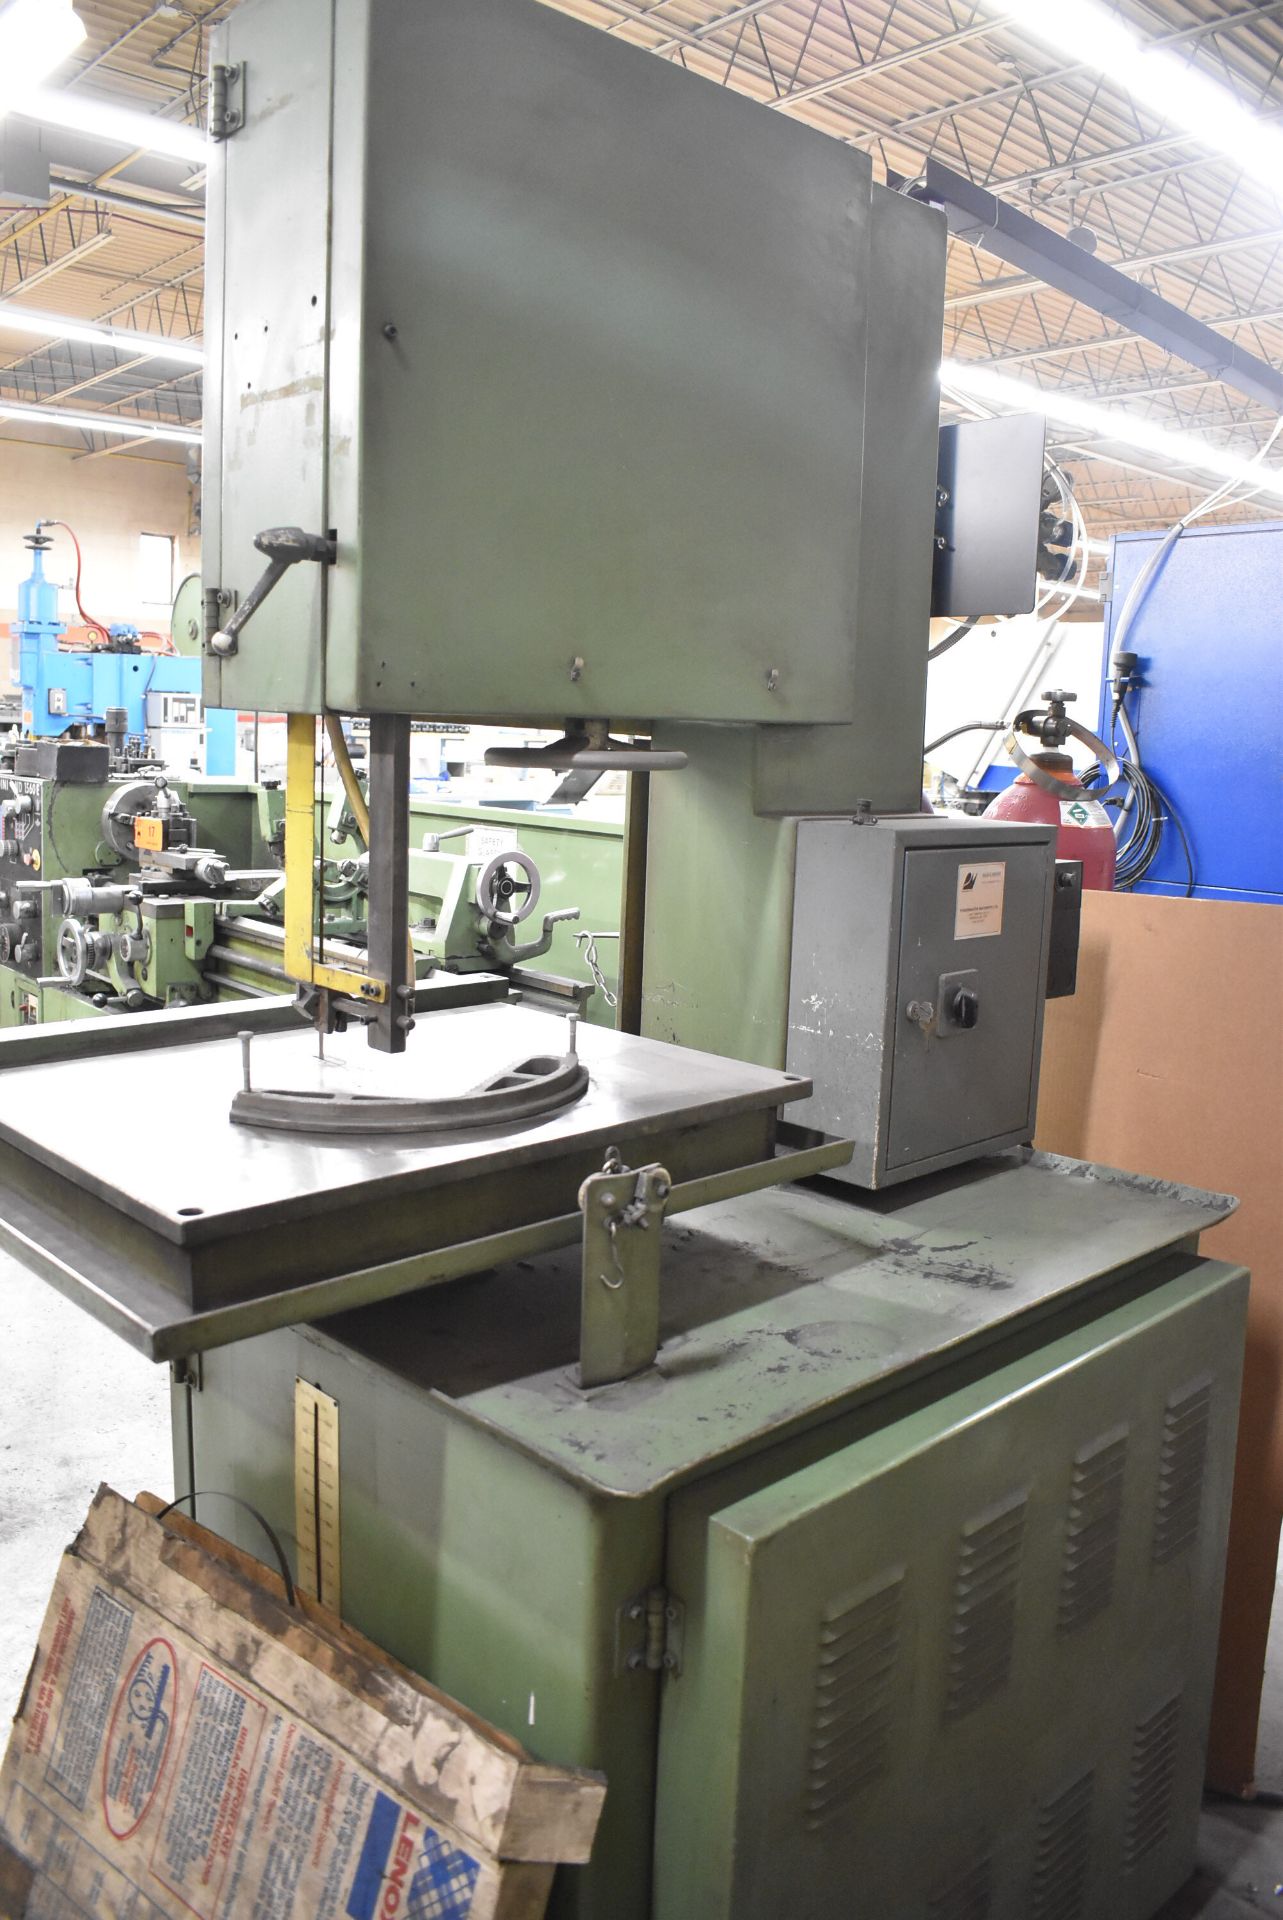 FRIGGI VERTICAL BAND SAW WITH 26"X26" TABLE, 20" THROAT, SPEEDS TO 948 M/MIN, 14" WORKPIECE - Image 3 of 9